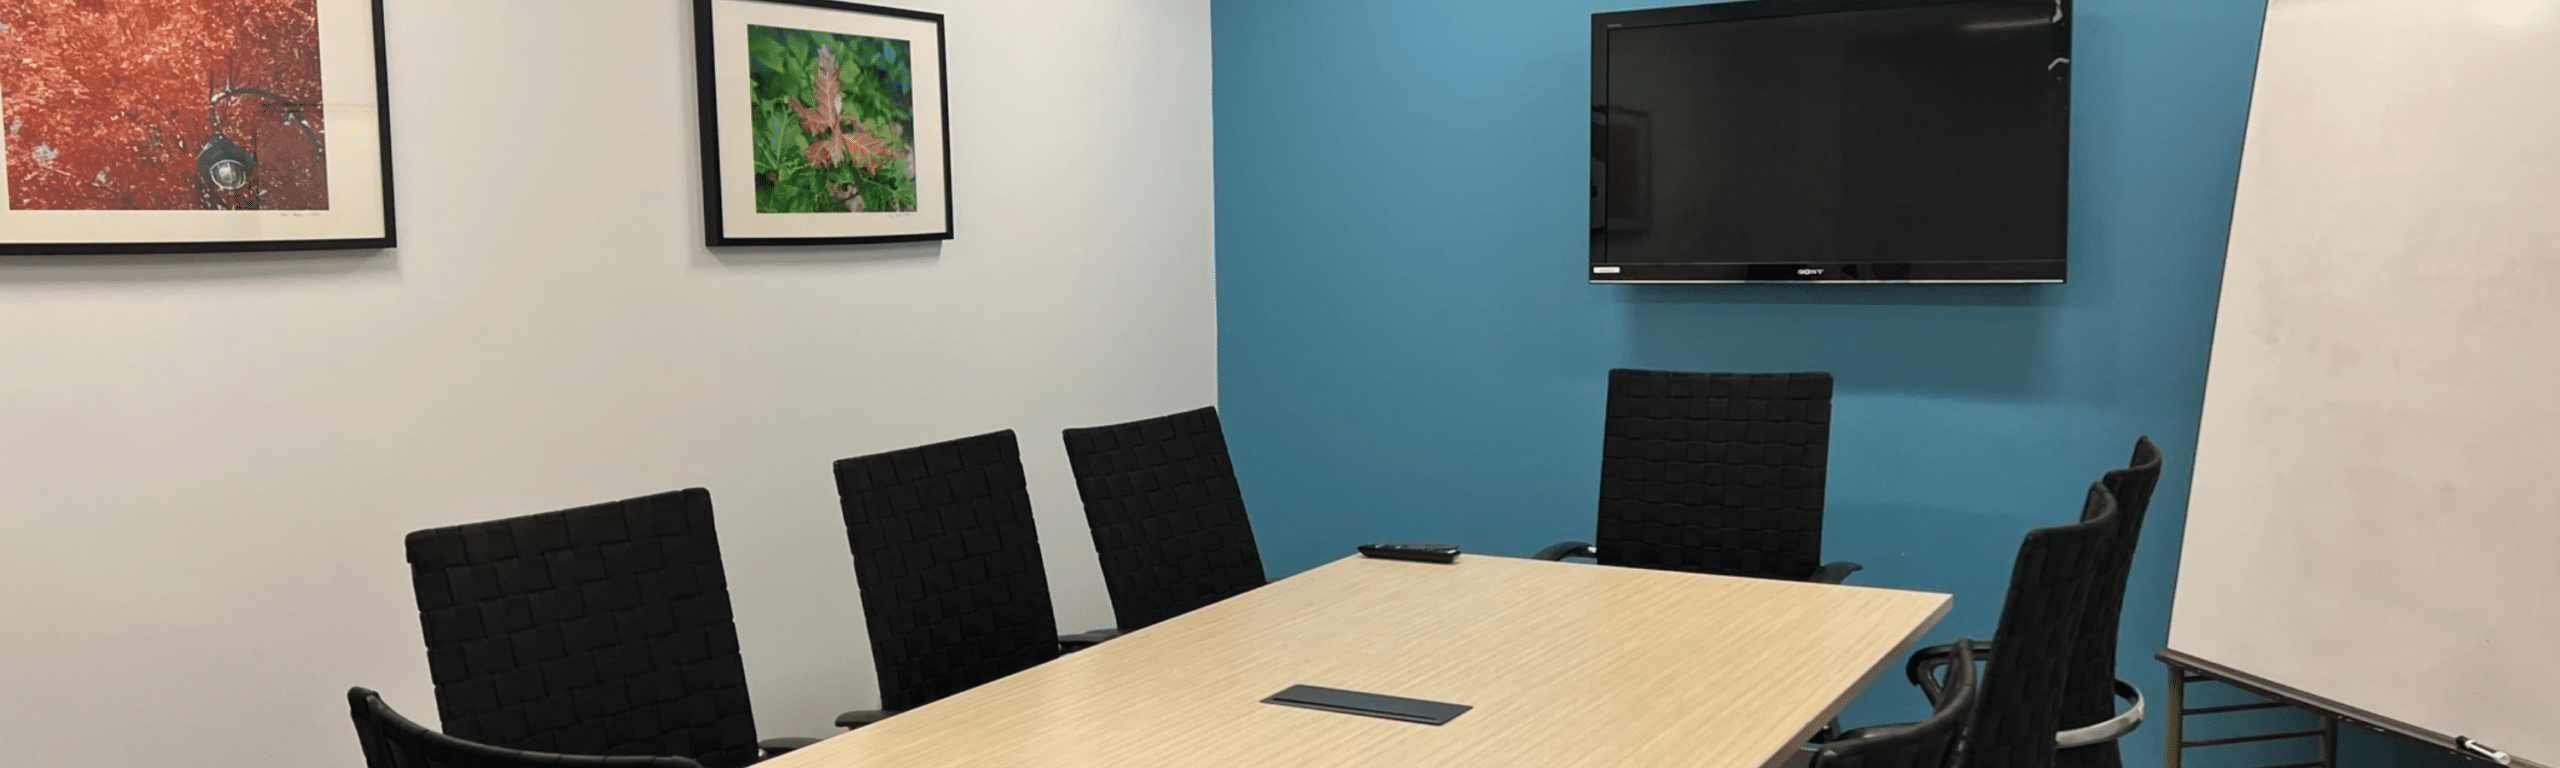 <h3 style="display: none;"> </h3>
<p>We provide flexible space to fit your needs, from dedicated workspaces to private offices and conference rooms.</p>
